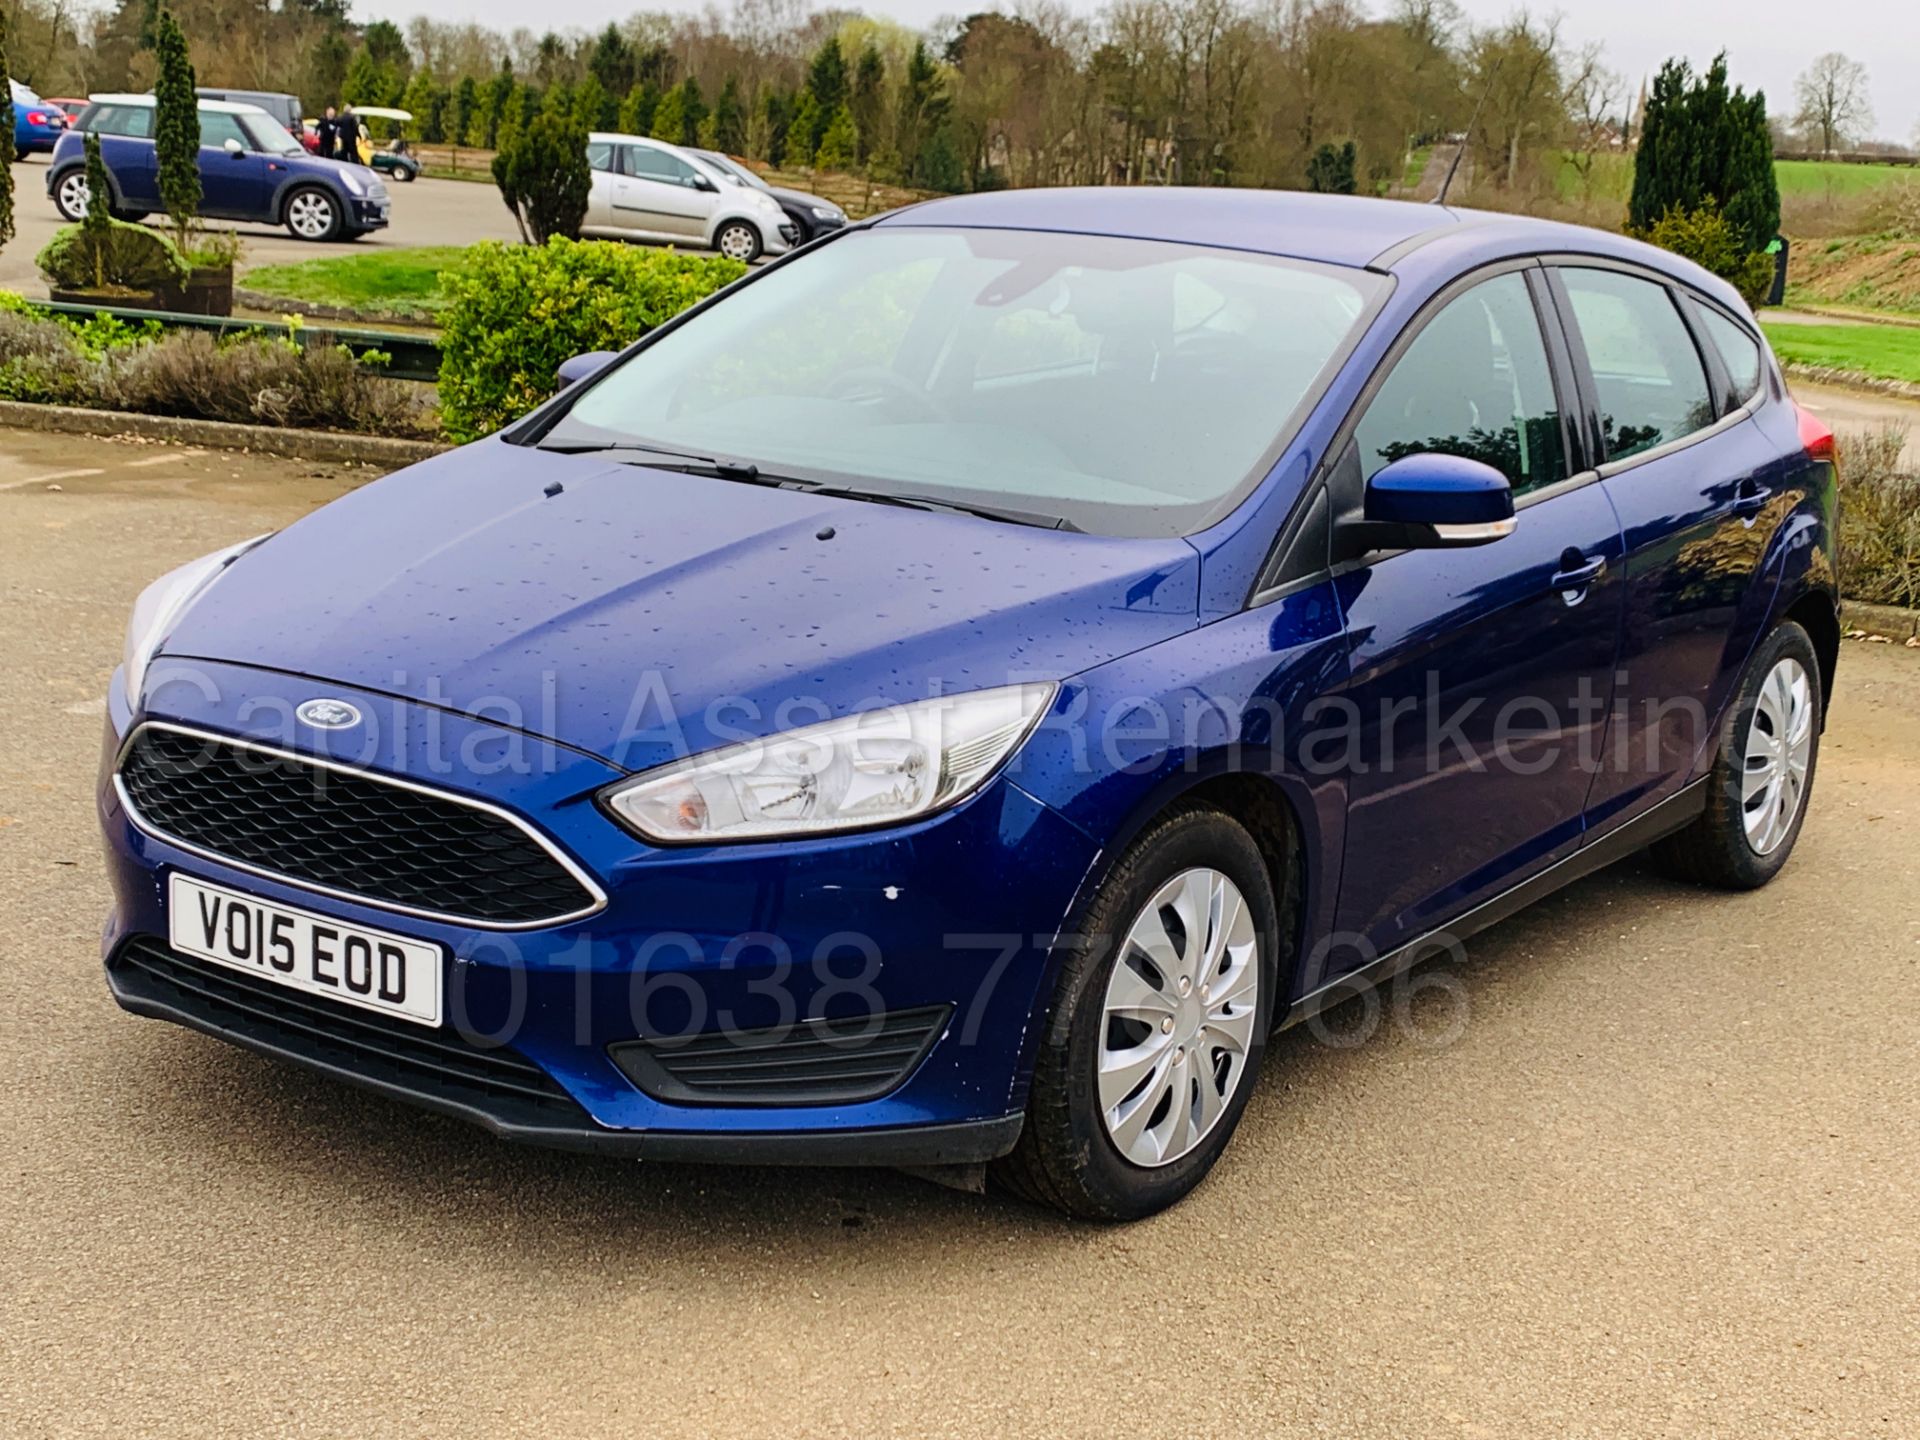 FORD FOCUS *STYLE* 5 DOOR HATCHBACK (2015-NEW MODEL) '1.5 TDCI-6 SPEED' (1 OWNER FROM NEW) *SAT NAV* - Image 4 of 39